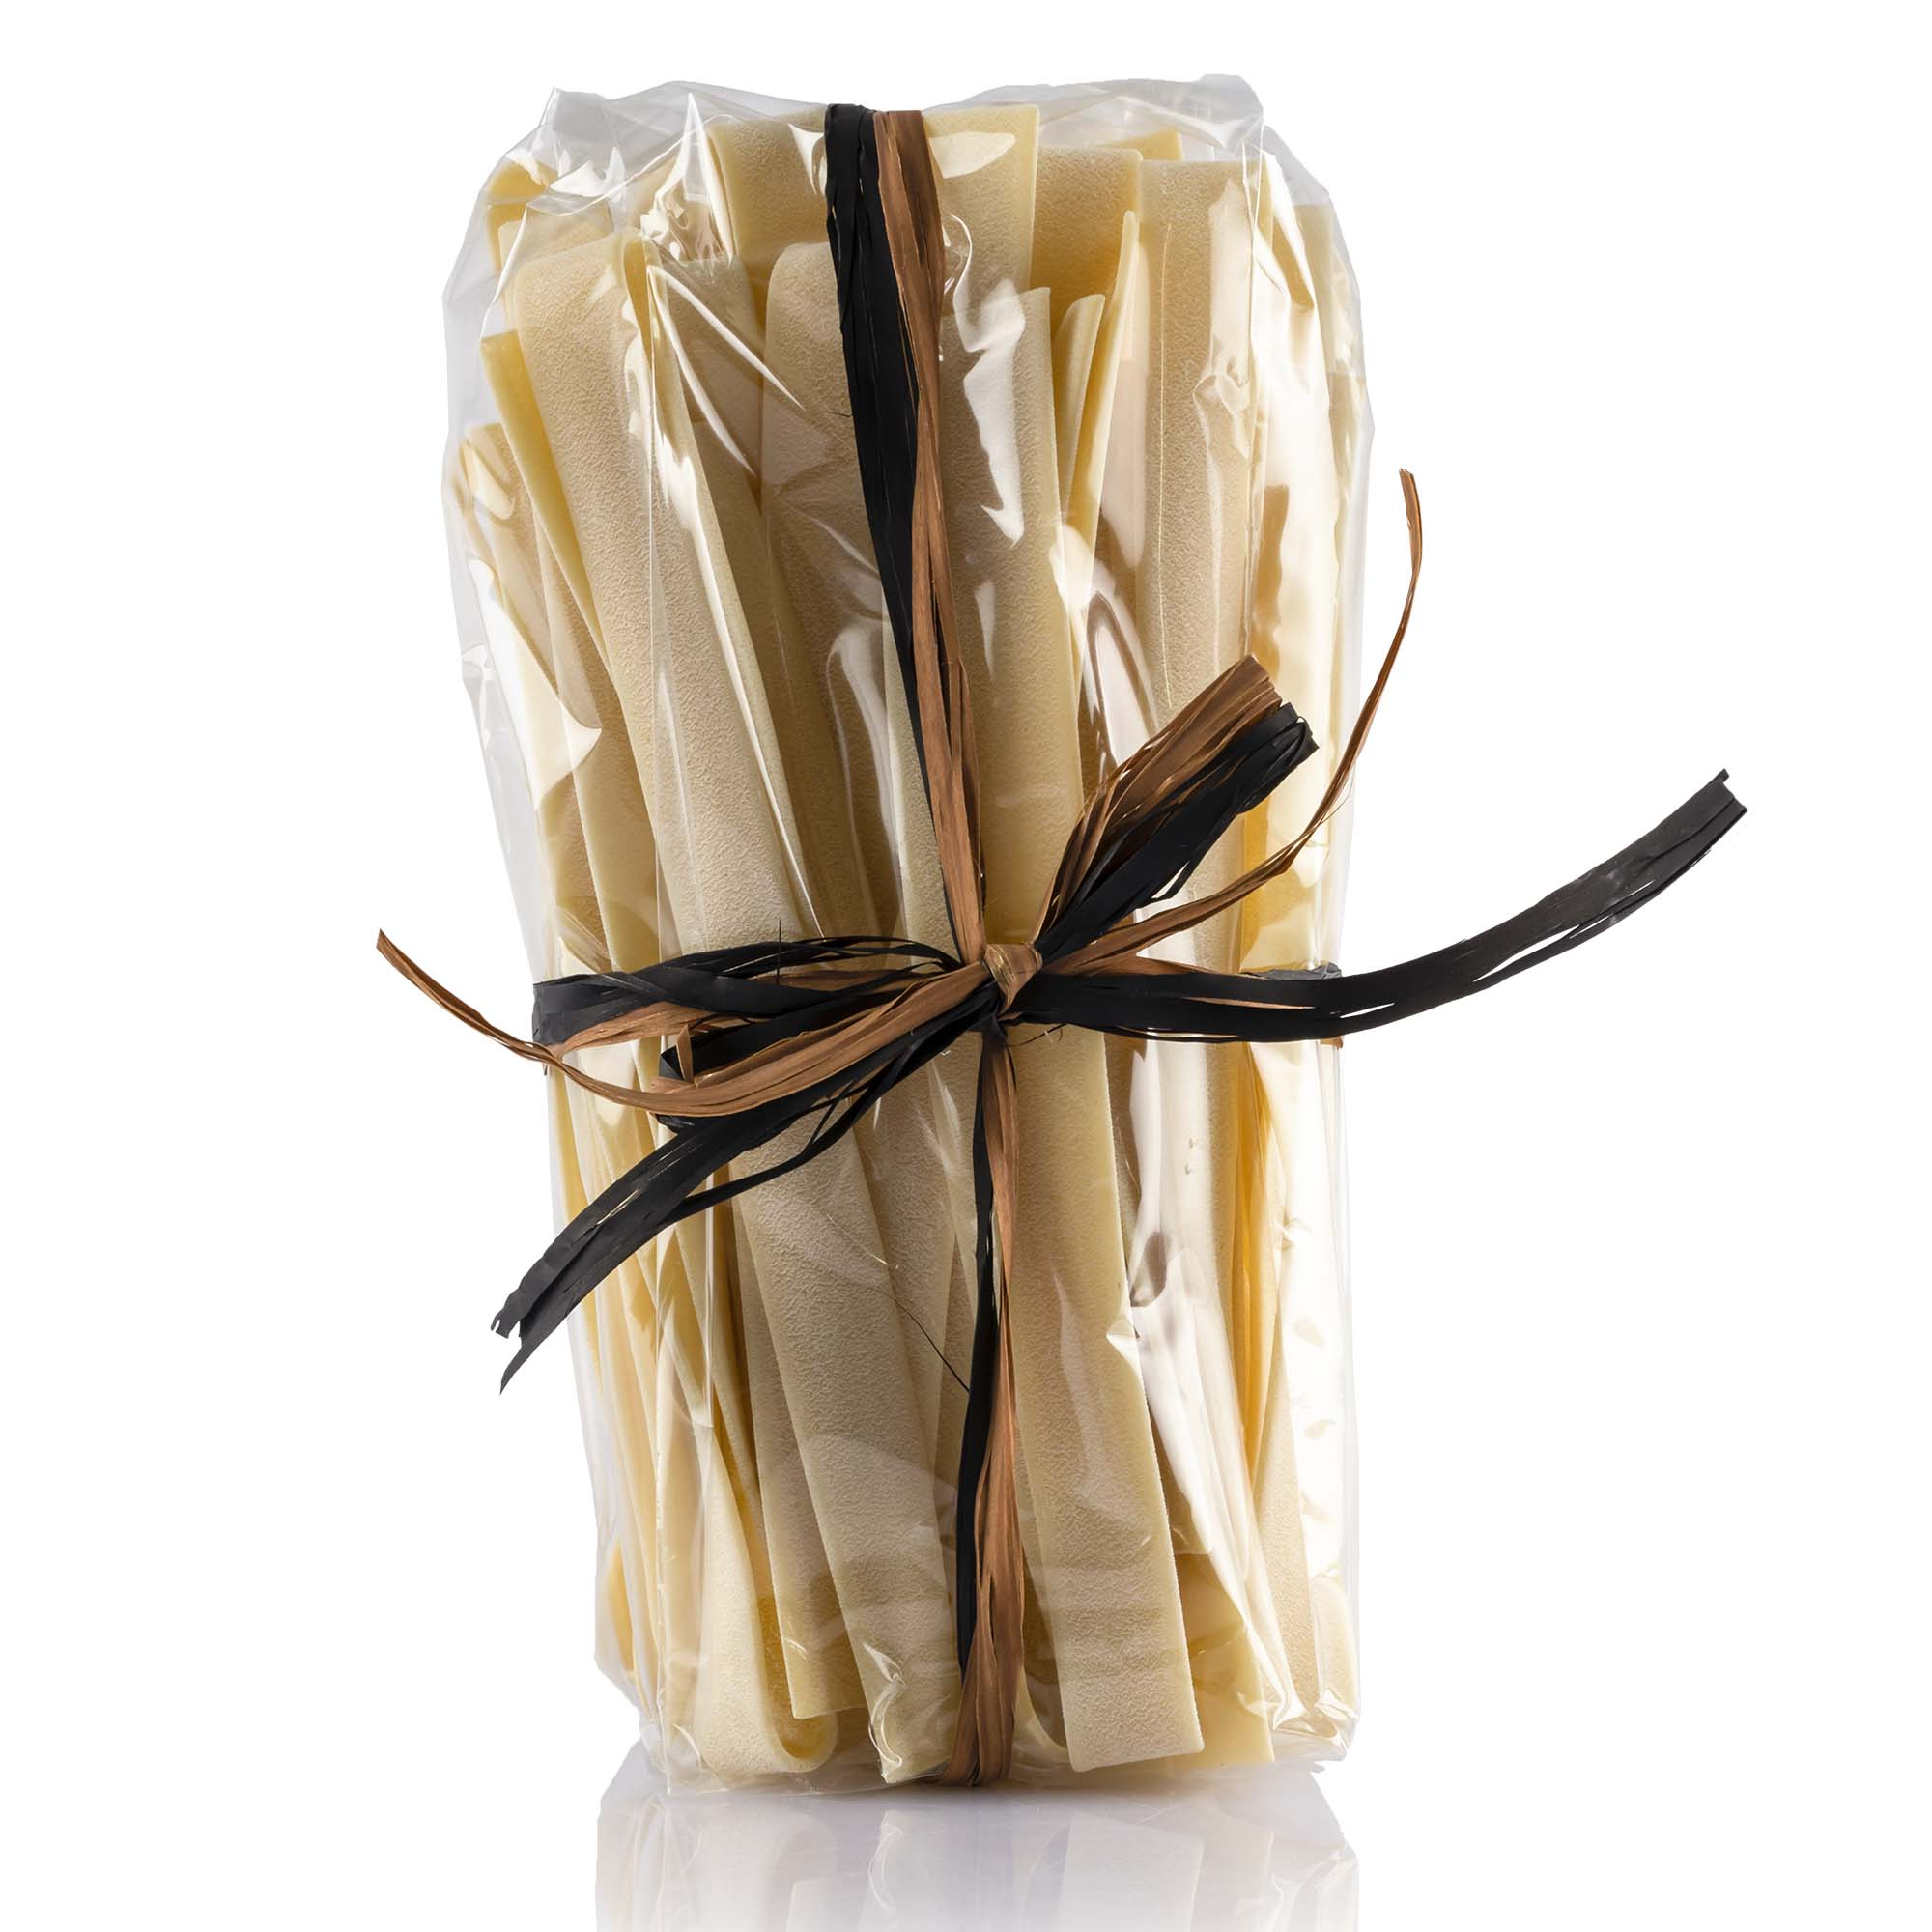 Pappardelle Hartweizengriess, 500g